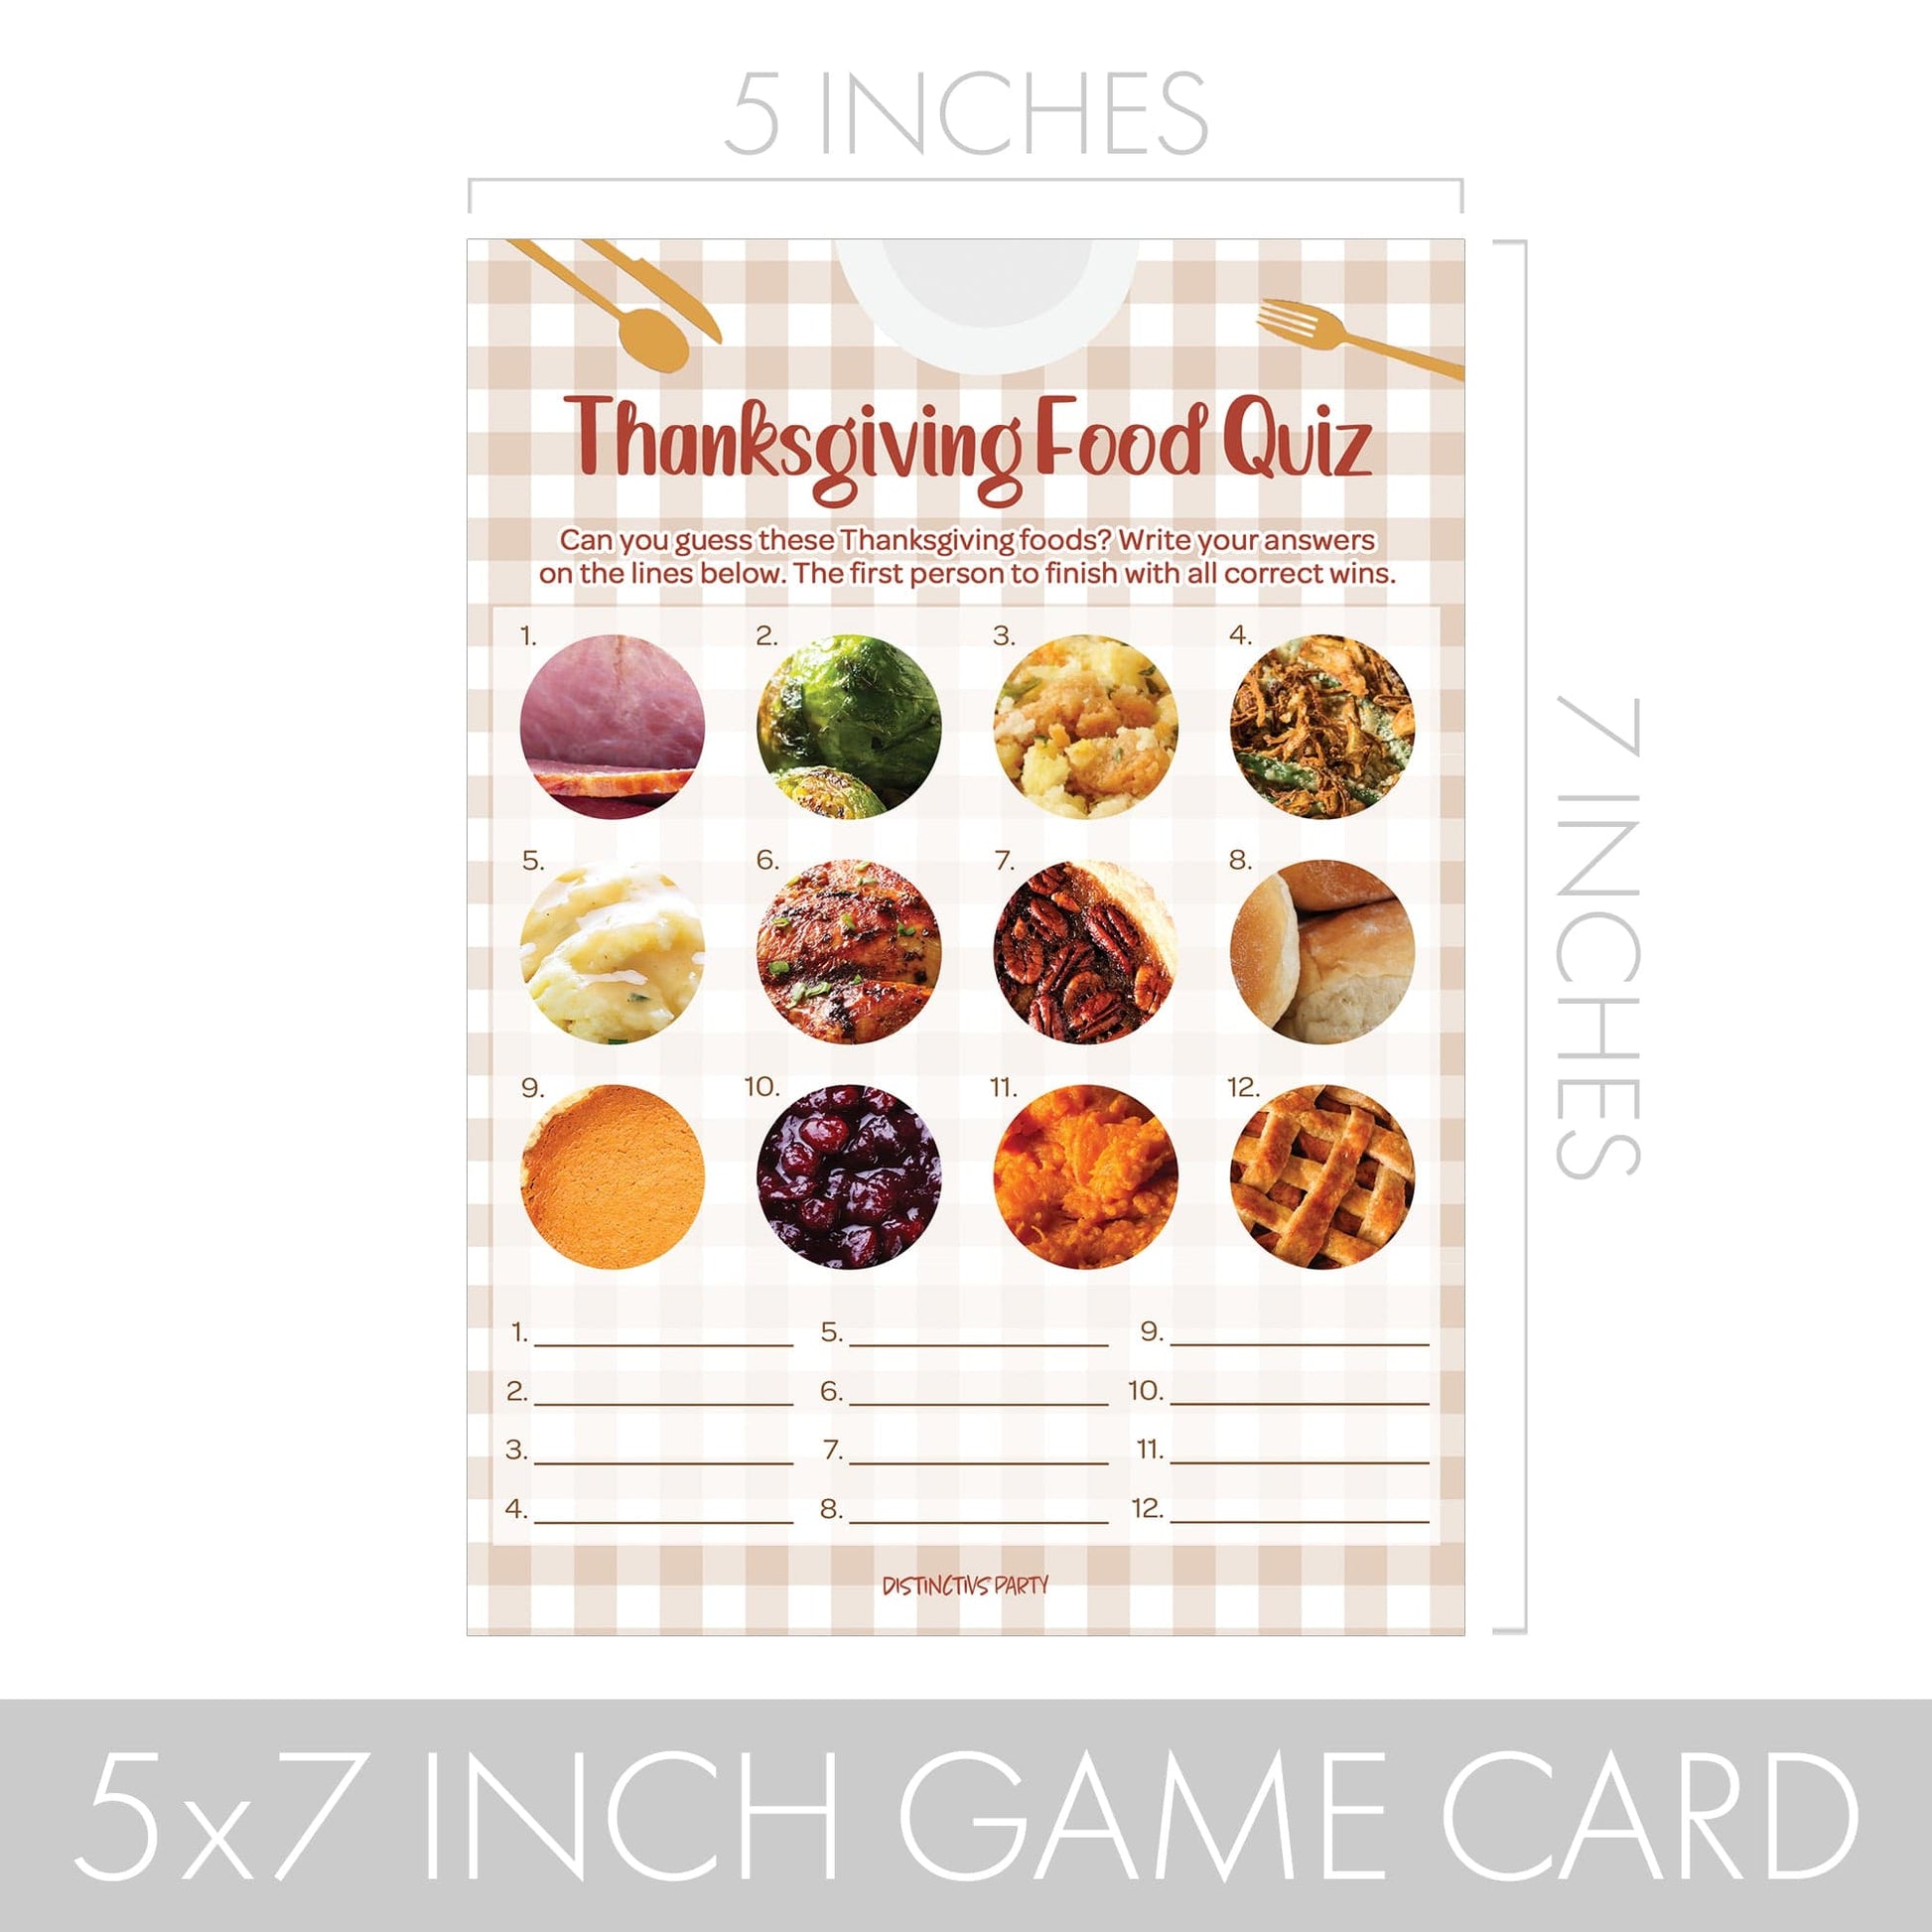 Thanksgiving Party Game Bundle - Emoji Guessing Game and Thanksgiving Food Quiz - 25 Dual-Sided Cards